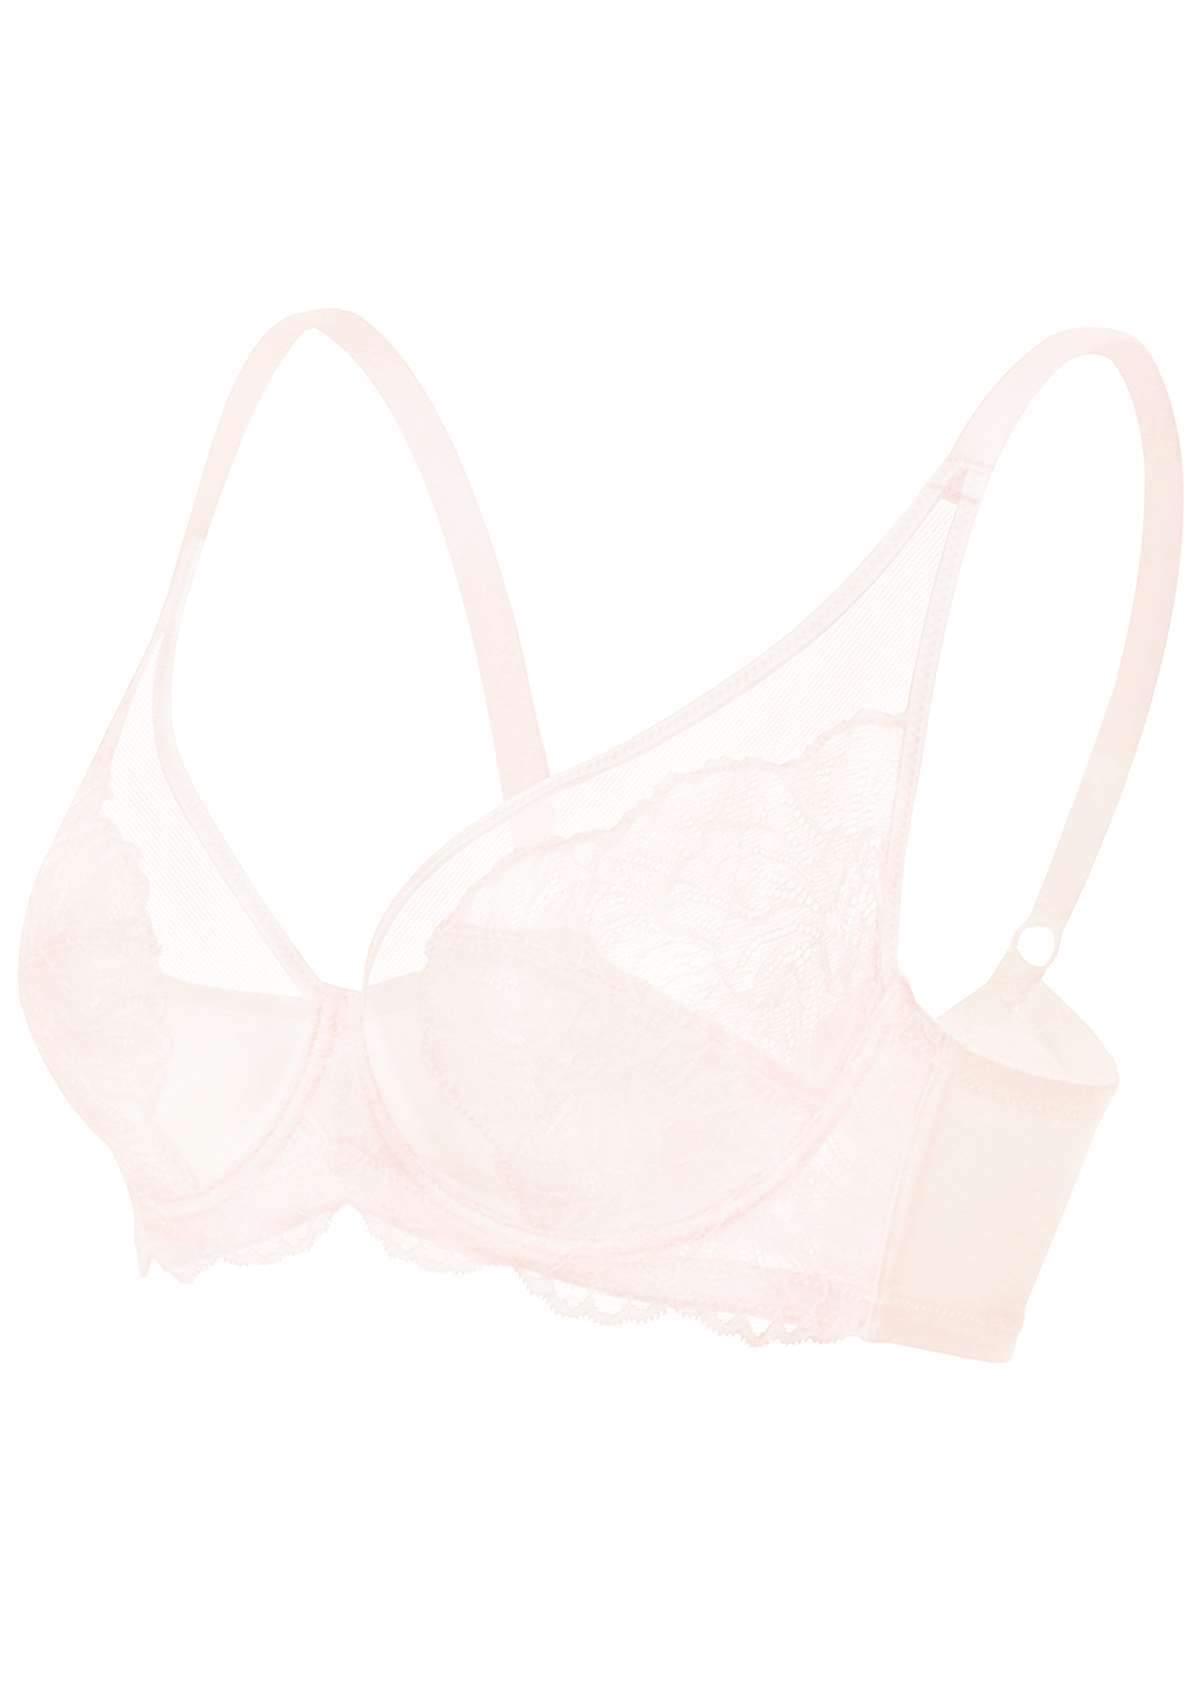 HSIA Blossom Sheer Lace Bra: Comfortable Underwire Bra For Big Busts - White / 44 / G